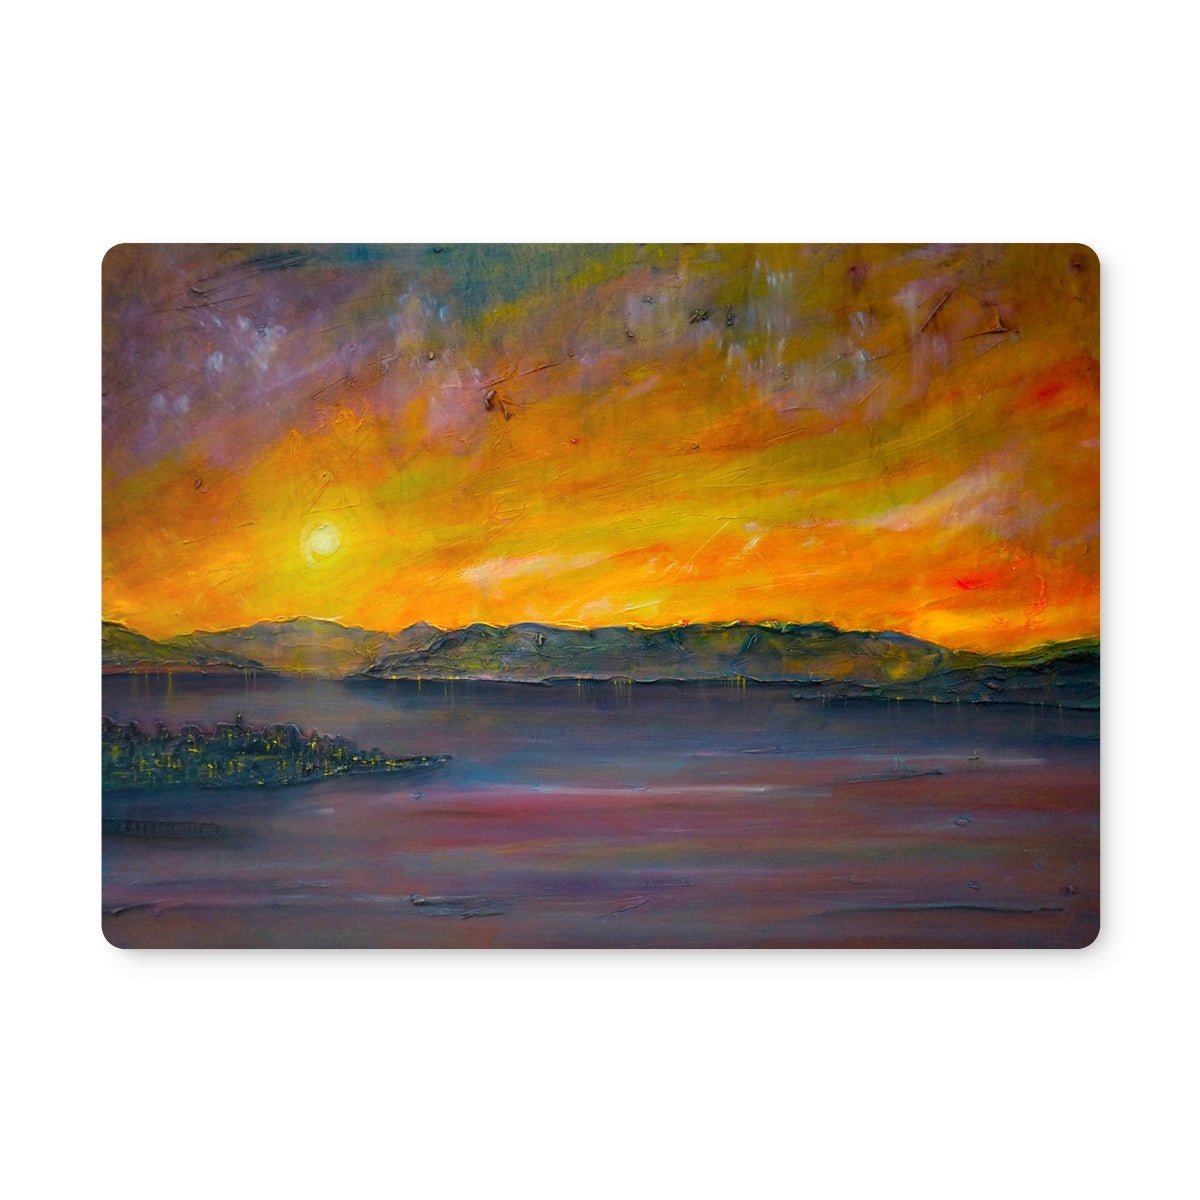 Sunset Over Gourock Art Gifts Placemat-Placemats-River Clyde Art Gallery-6 Placemats-Paintings, Prints, Homeware, Art Gifts From Scotland By Scottish Artist Kevin Hunter